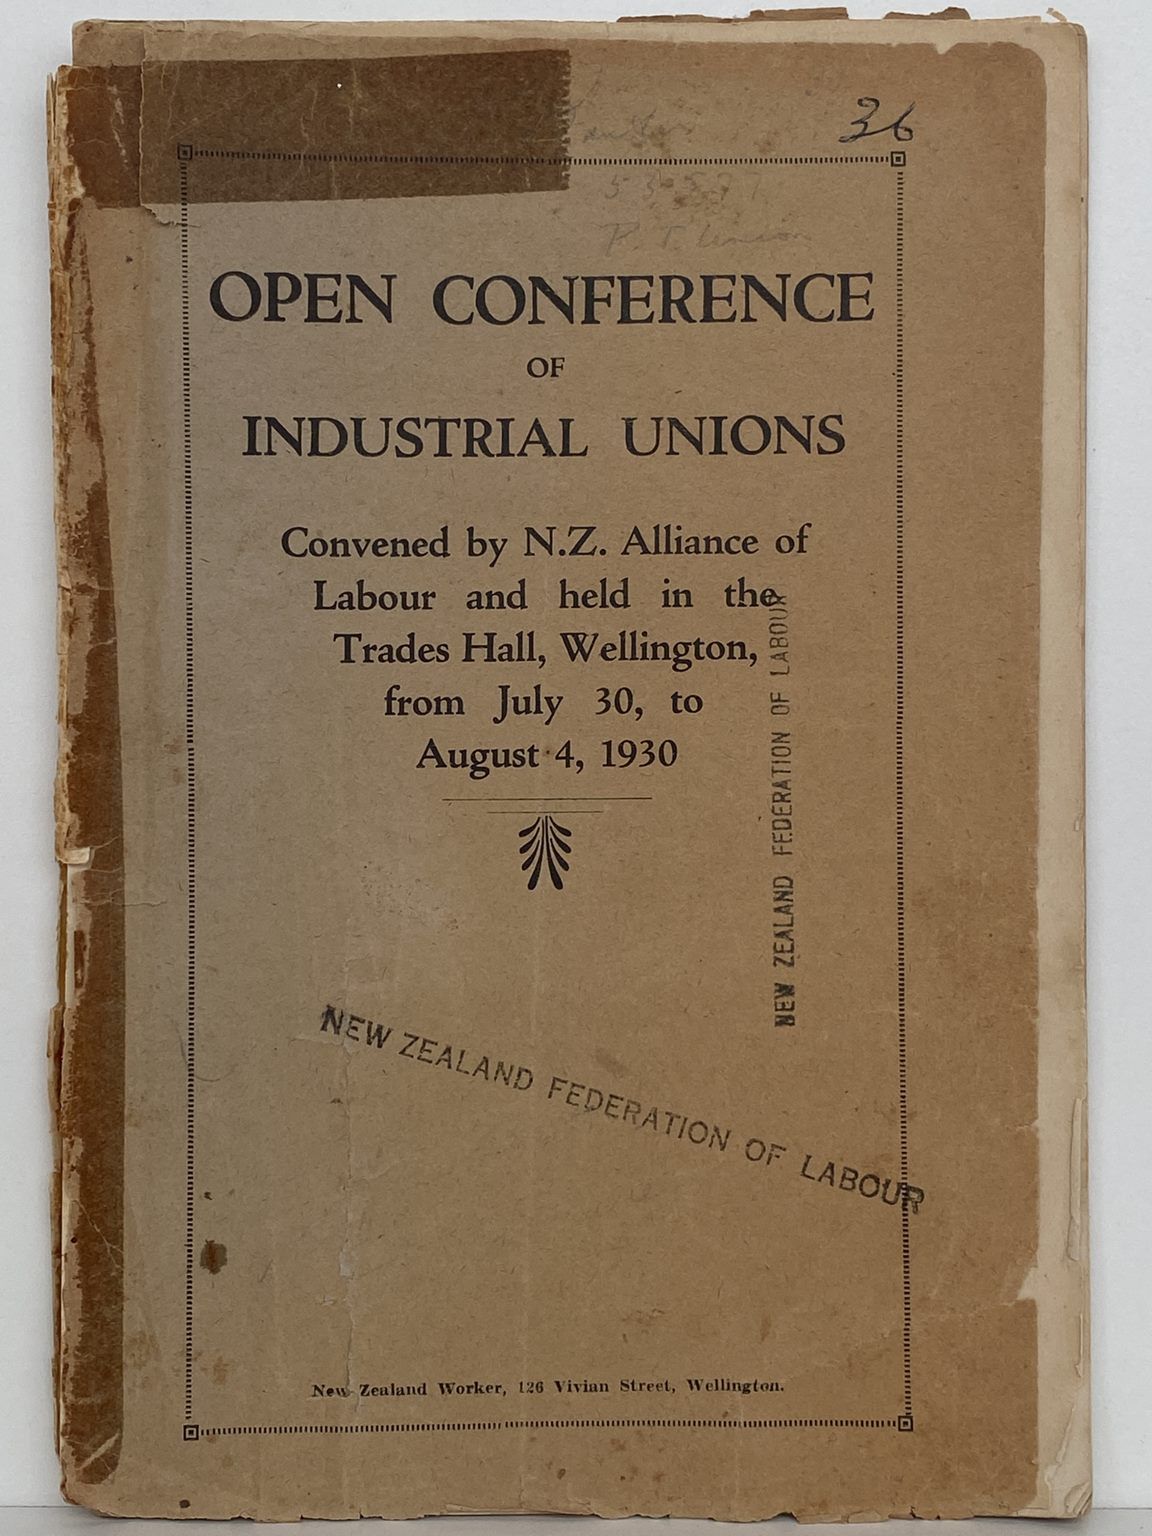 CONFERENCE OF INDUSTRIAL UNIONS - Convened